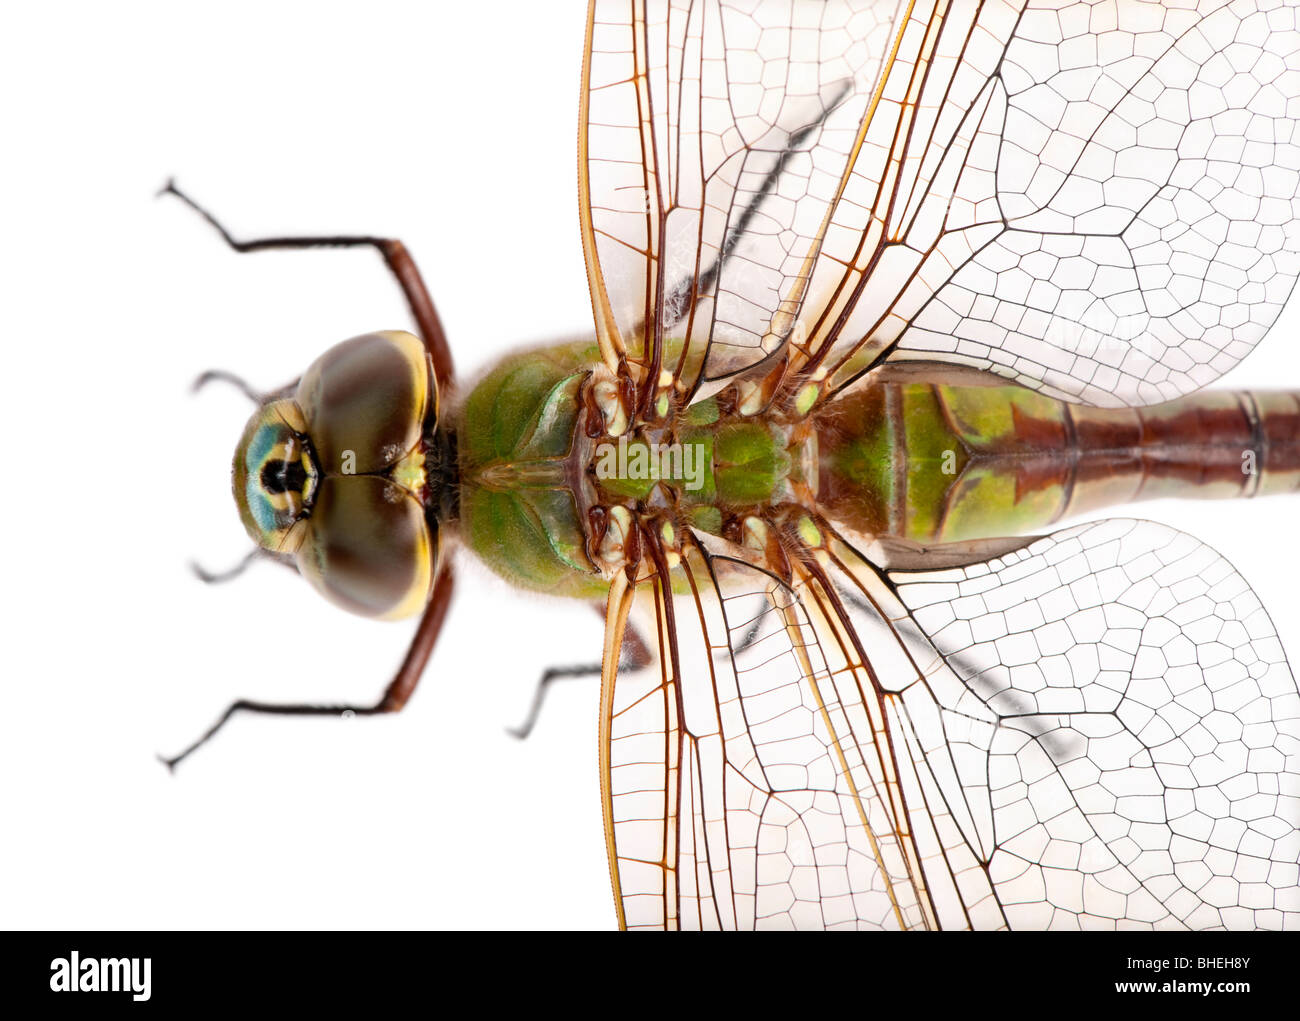 High angle view of old Emperor dragonfly, Anax imperator, in front of white background Stock Photo